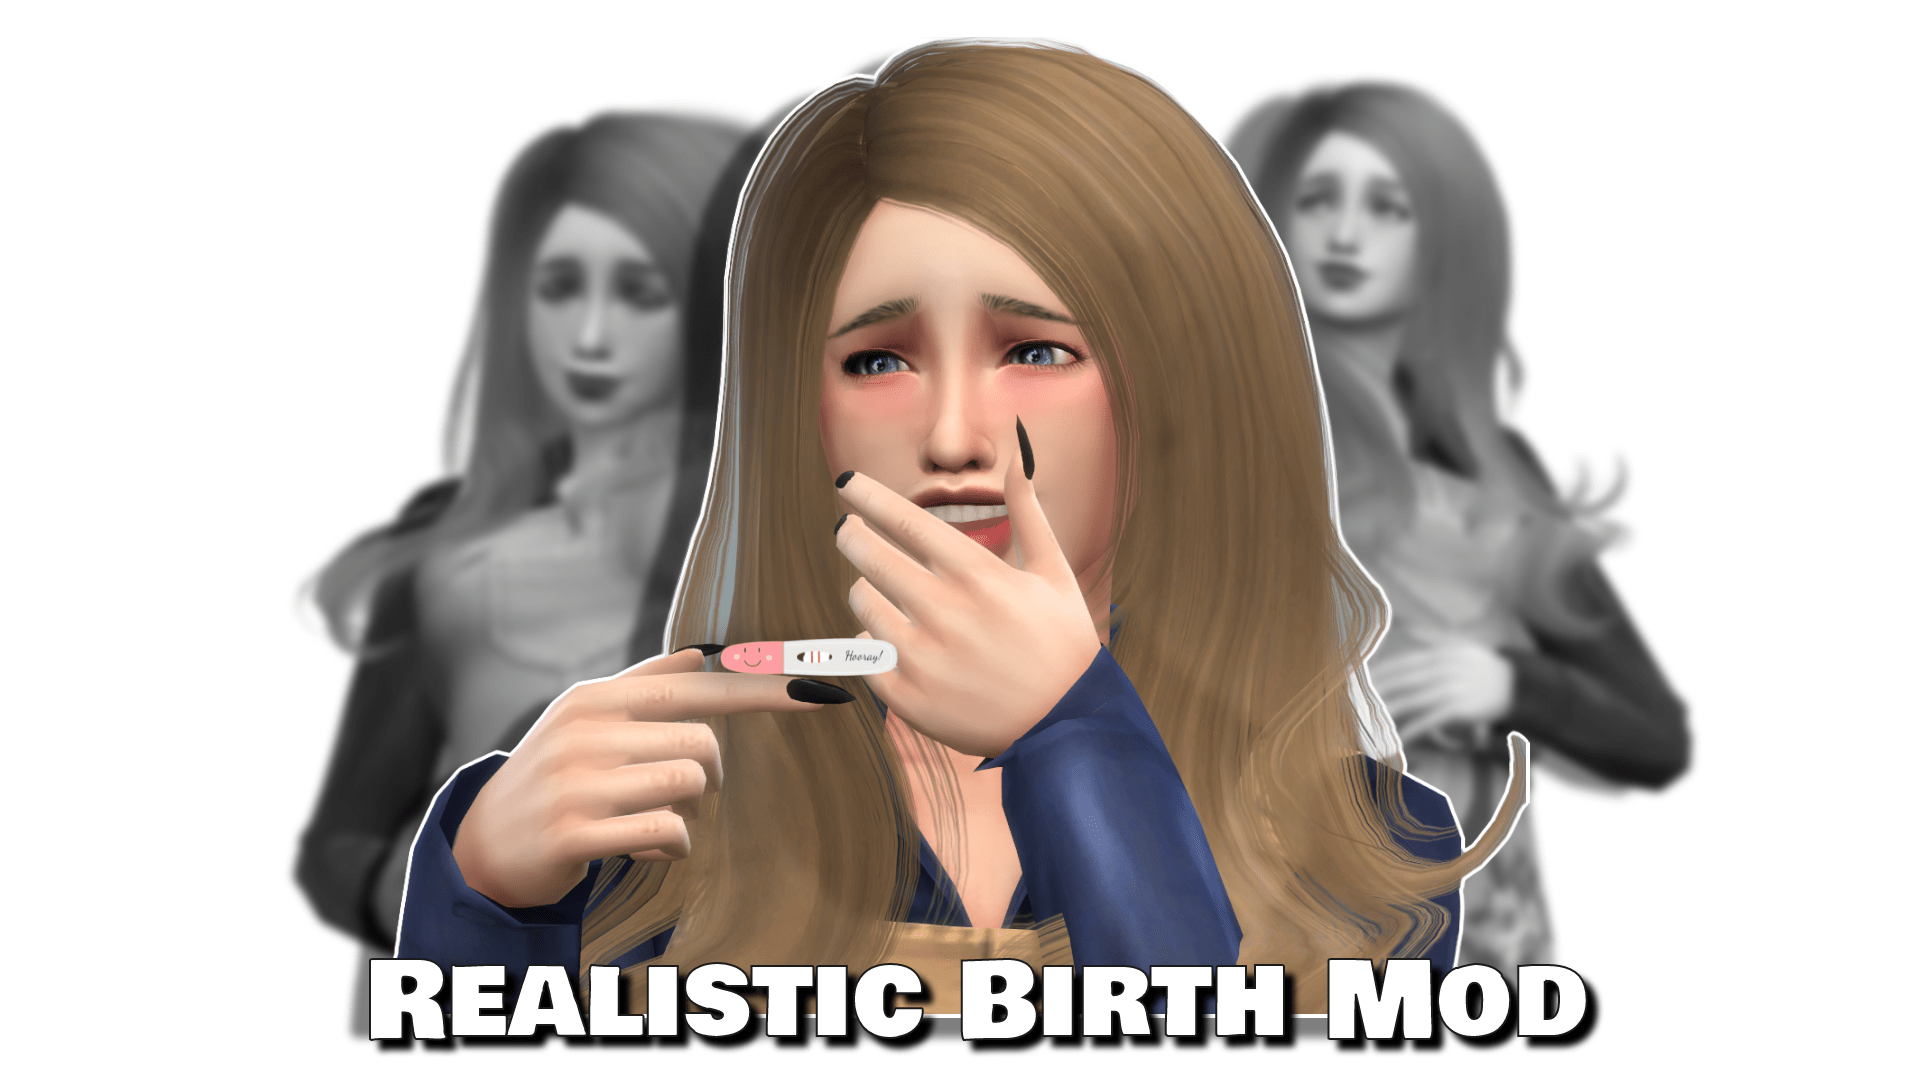 The Sims 4 Realistic Birth Mod Is It Good? — SNOOTYSIMS